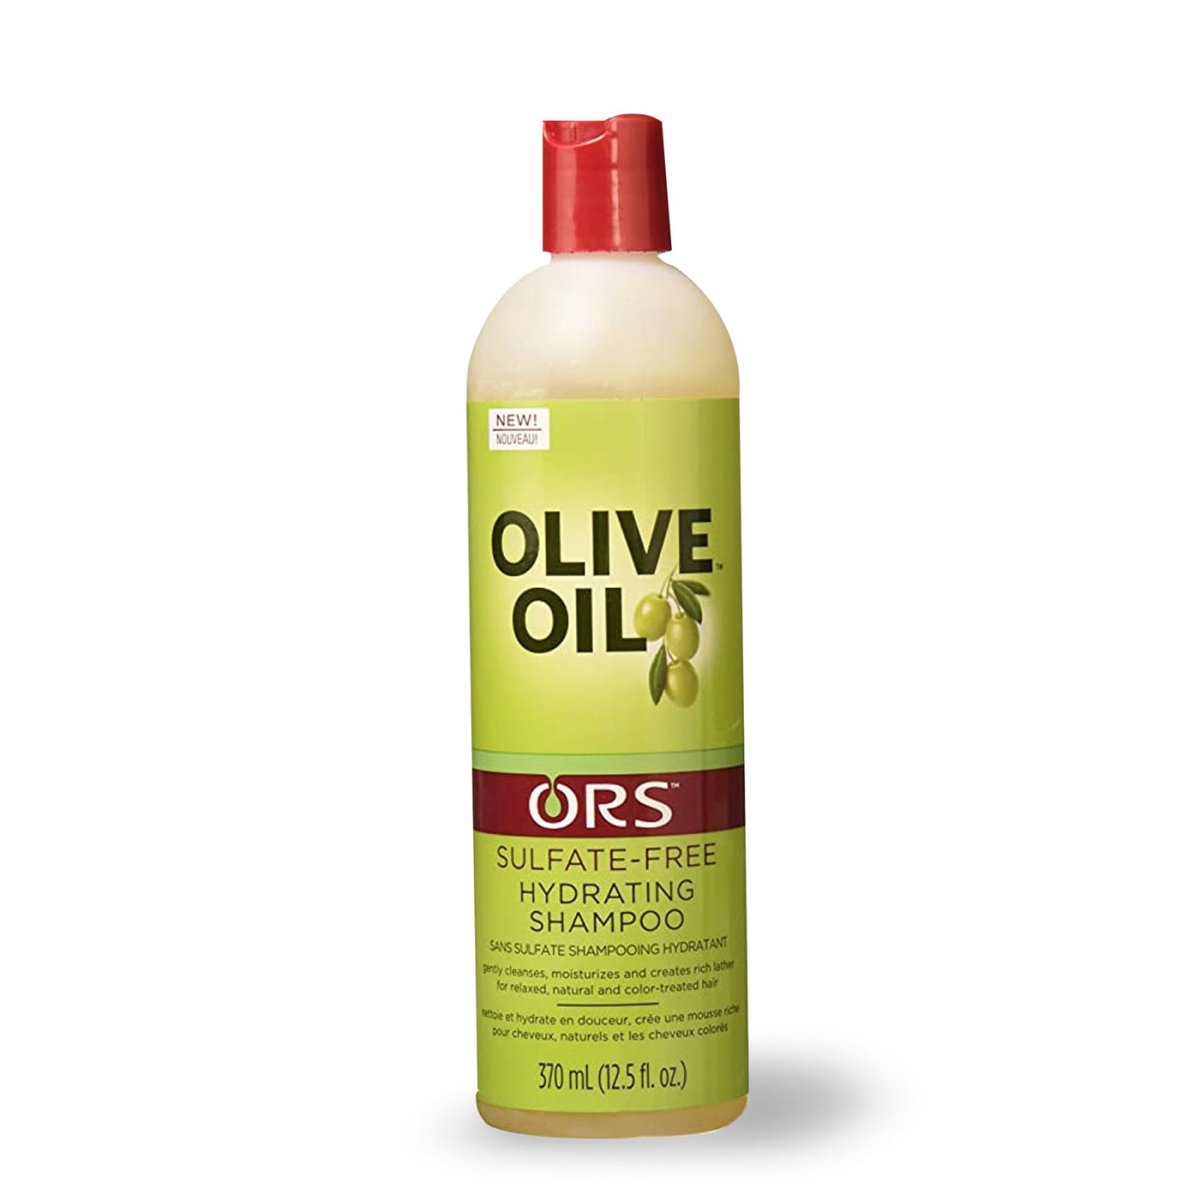 ORS Olive Oil Sulfate-Free Hydrating Shampoo 12.5oz - Southwestsix Cosmetics ORS Olive Oil Sulfate-Free Hydrating Shampoo 12.5oz Shampoo ORS Southwestsix Cosmetics ORS Olive Oil Sulfate-Free Hydrating Shampoo 12.5oz